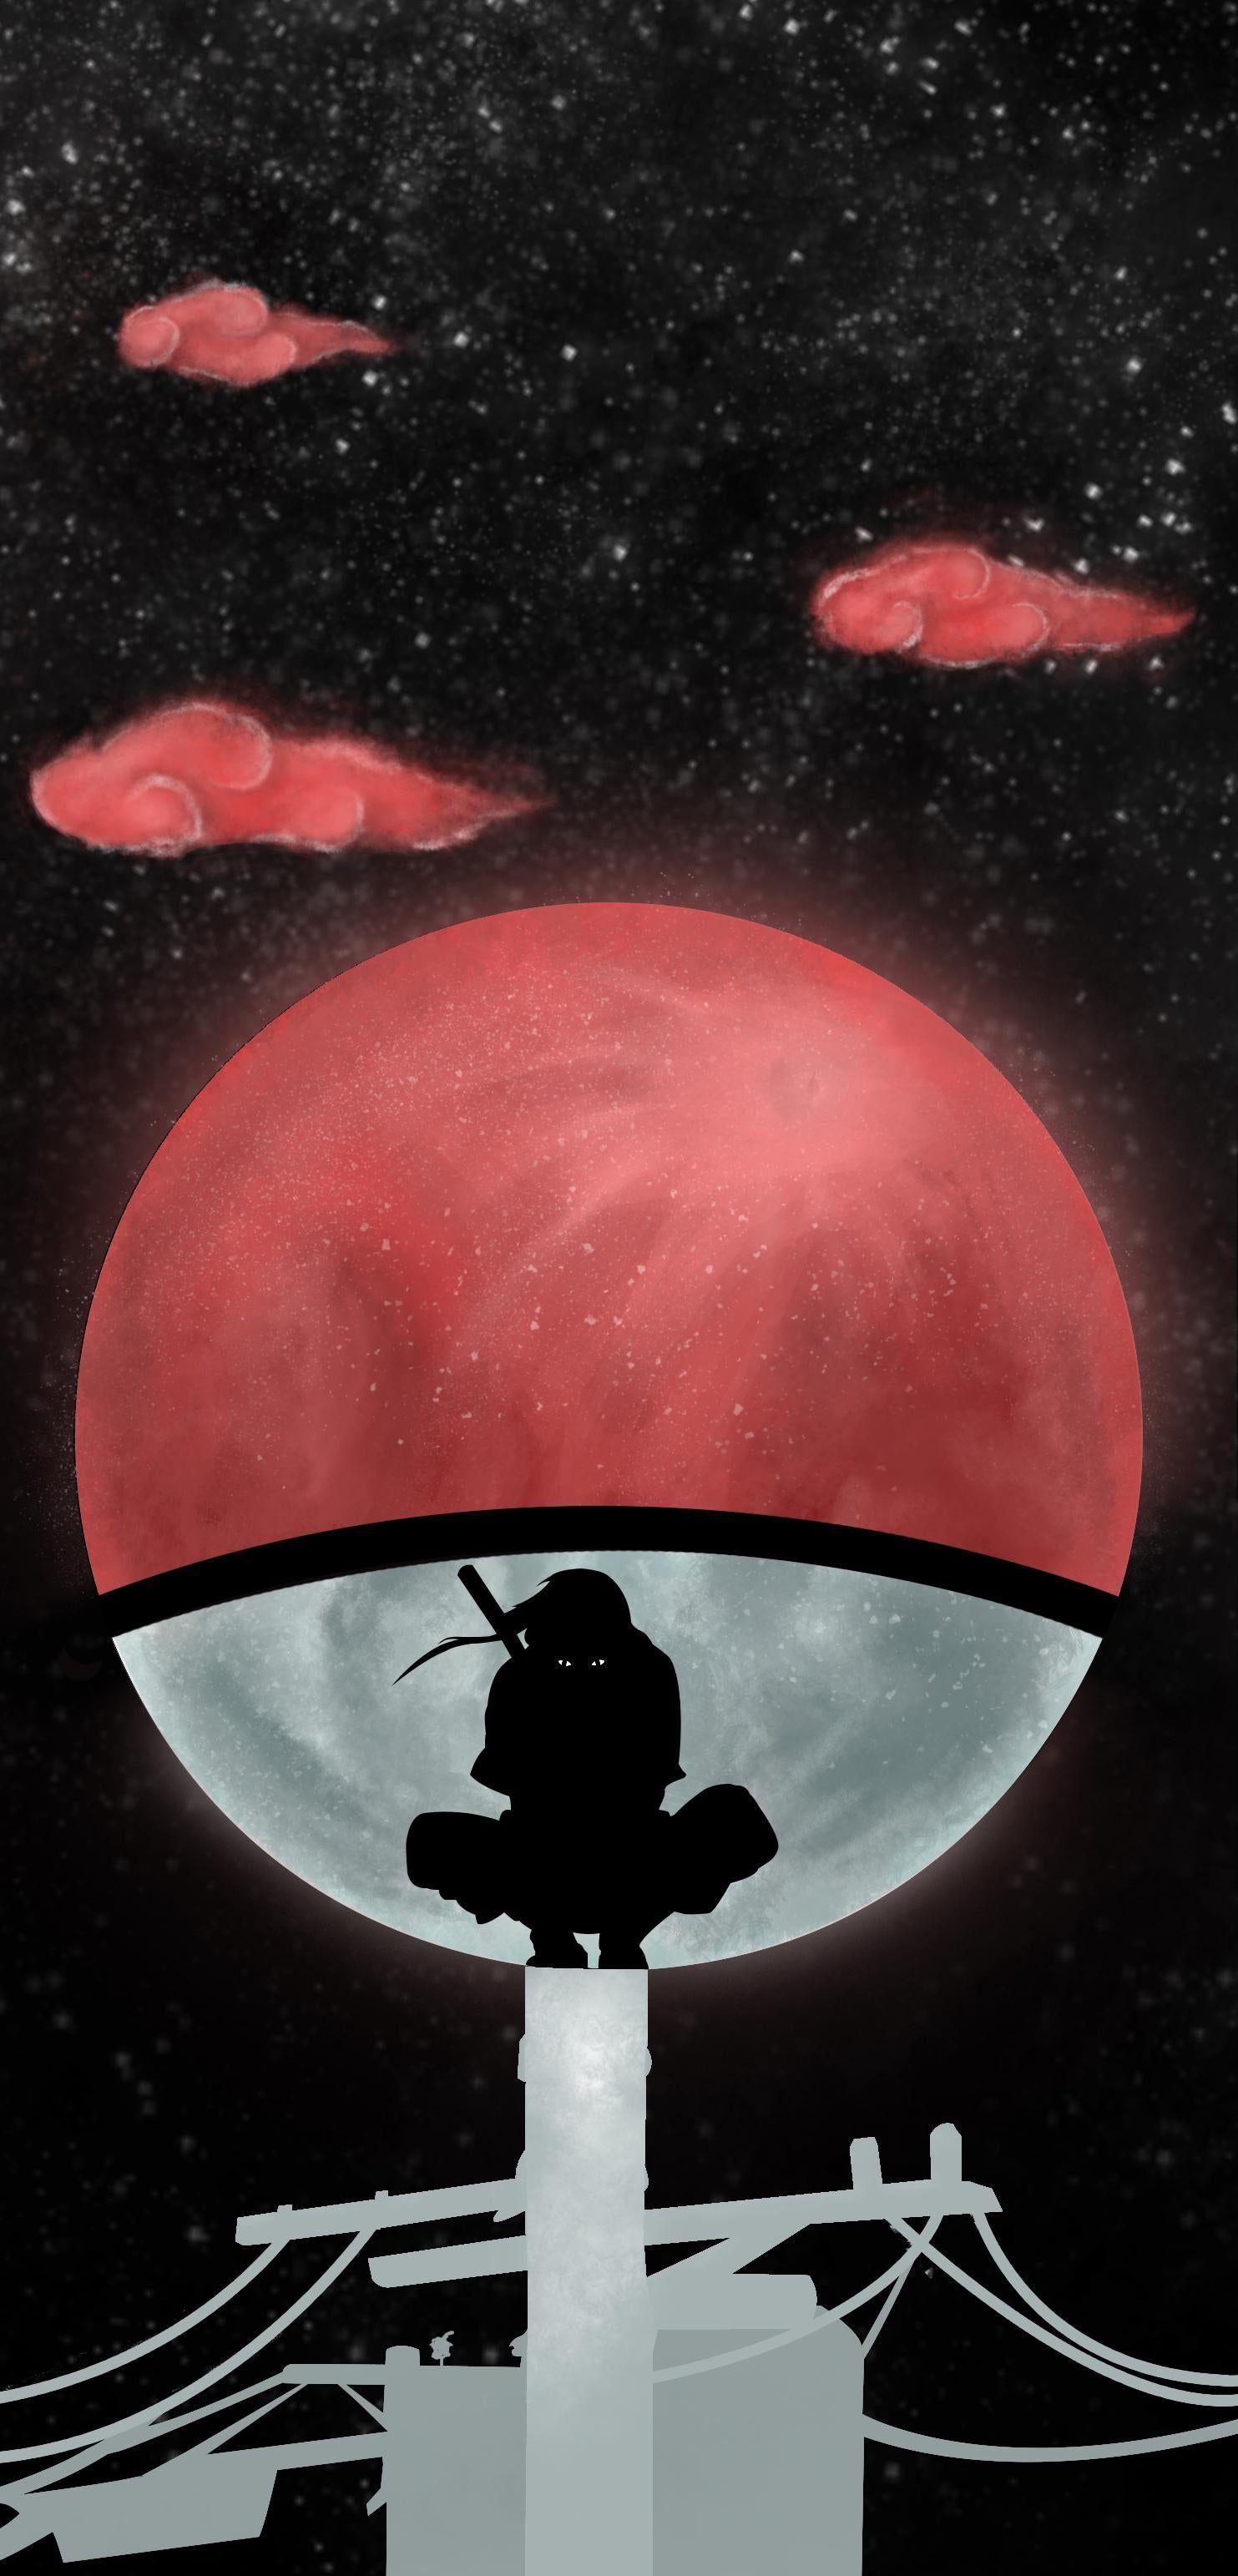 itachi fan art i made for my phone wallpaper, first time sharing, hope you guys like it